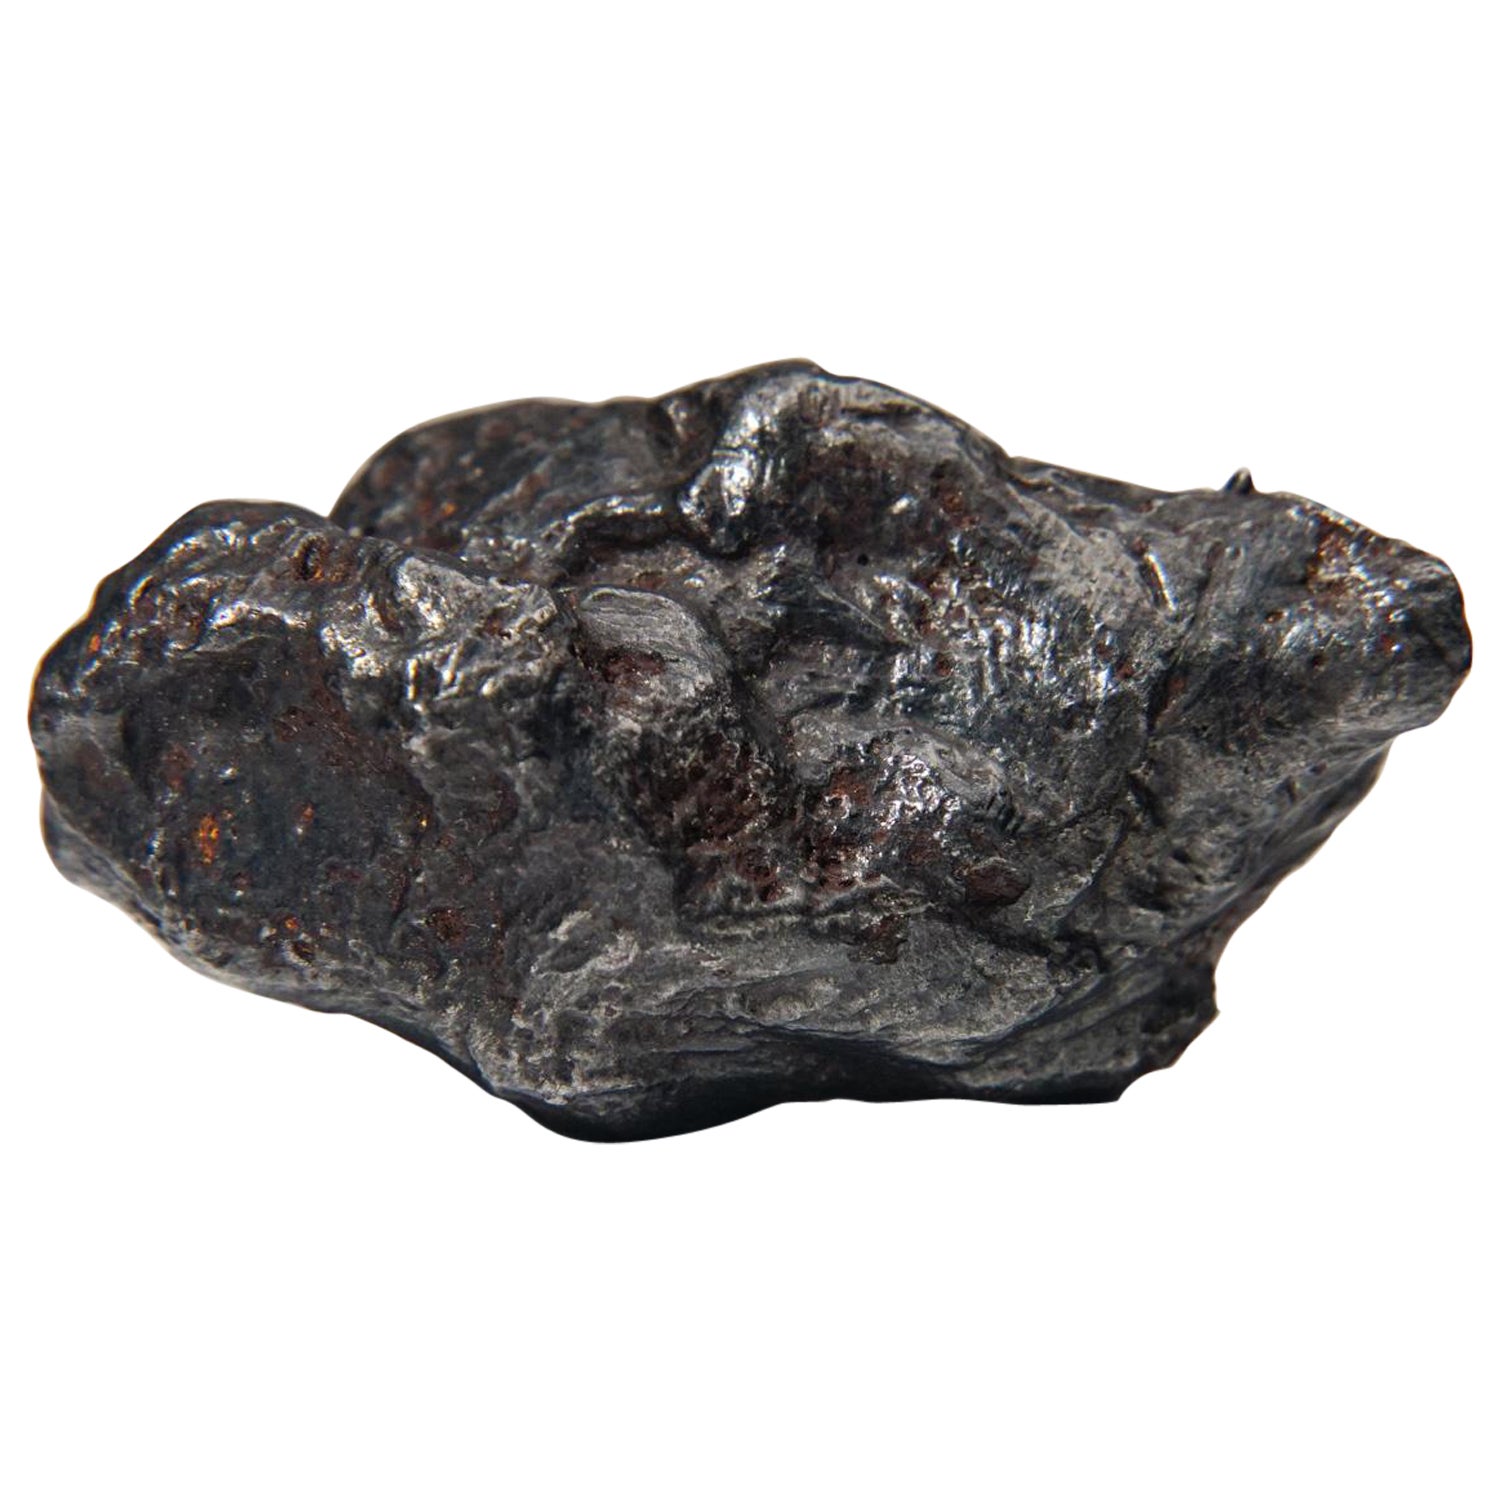 Genuine Sikhote-Alin Meteorite on Acrylic Stand (99.5 grams) For Sale